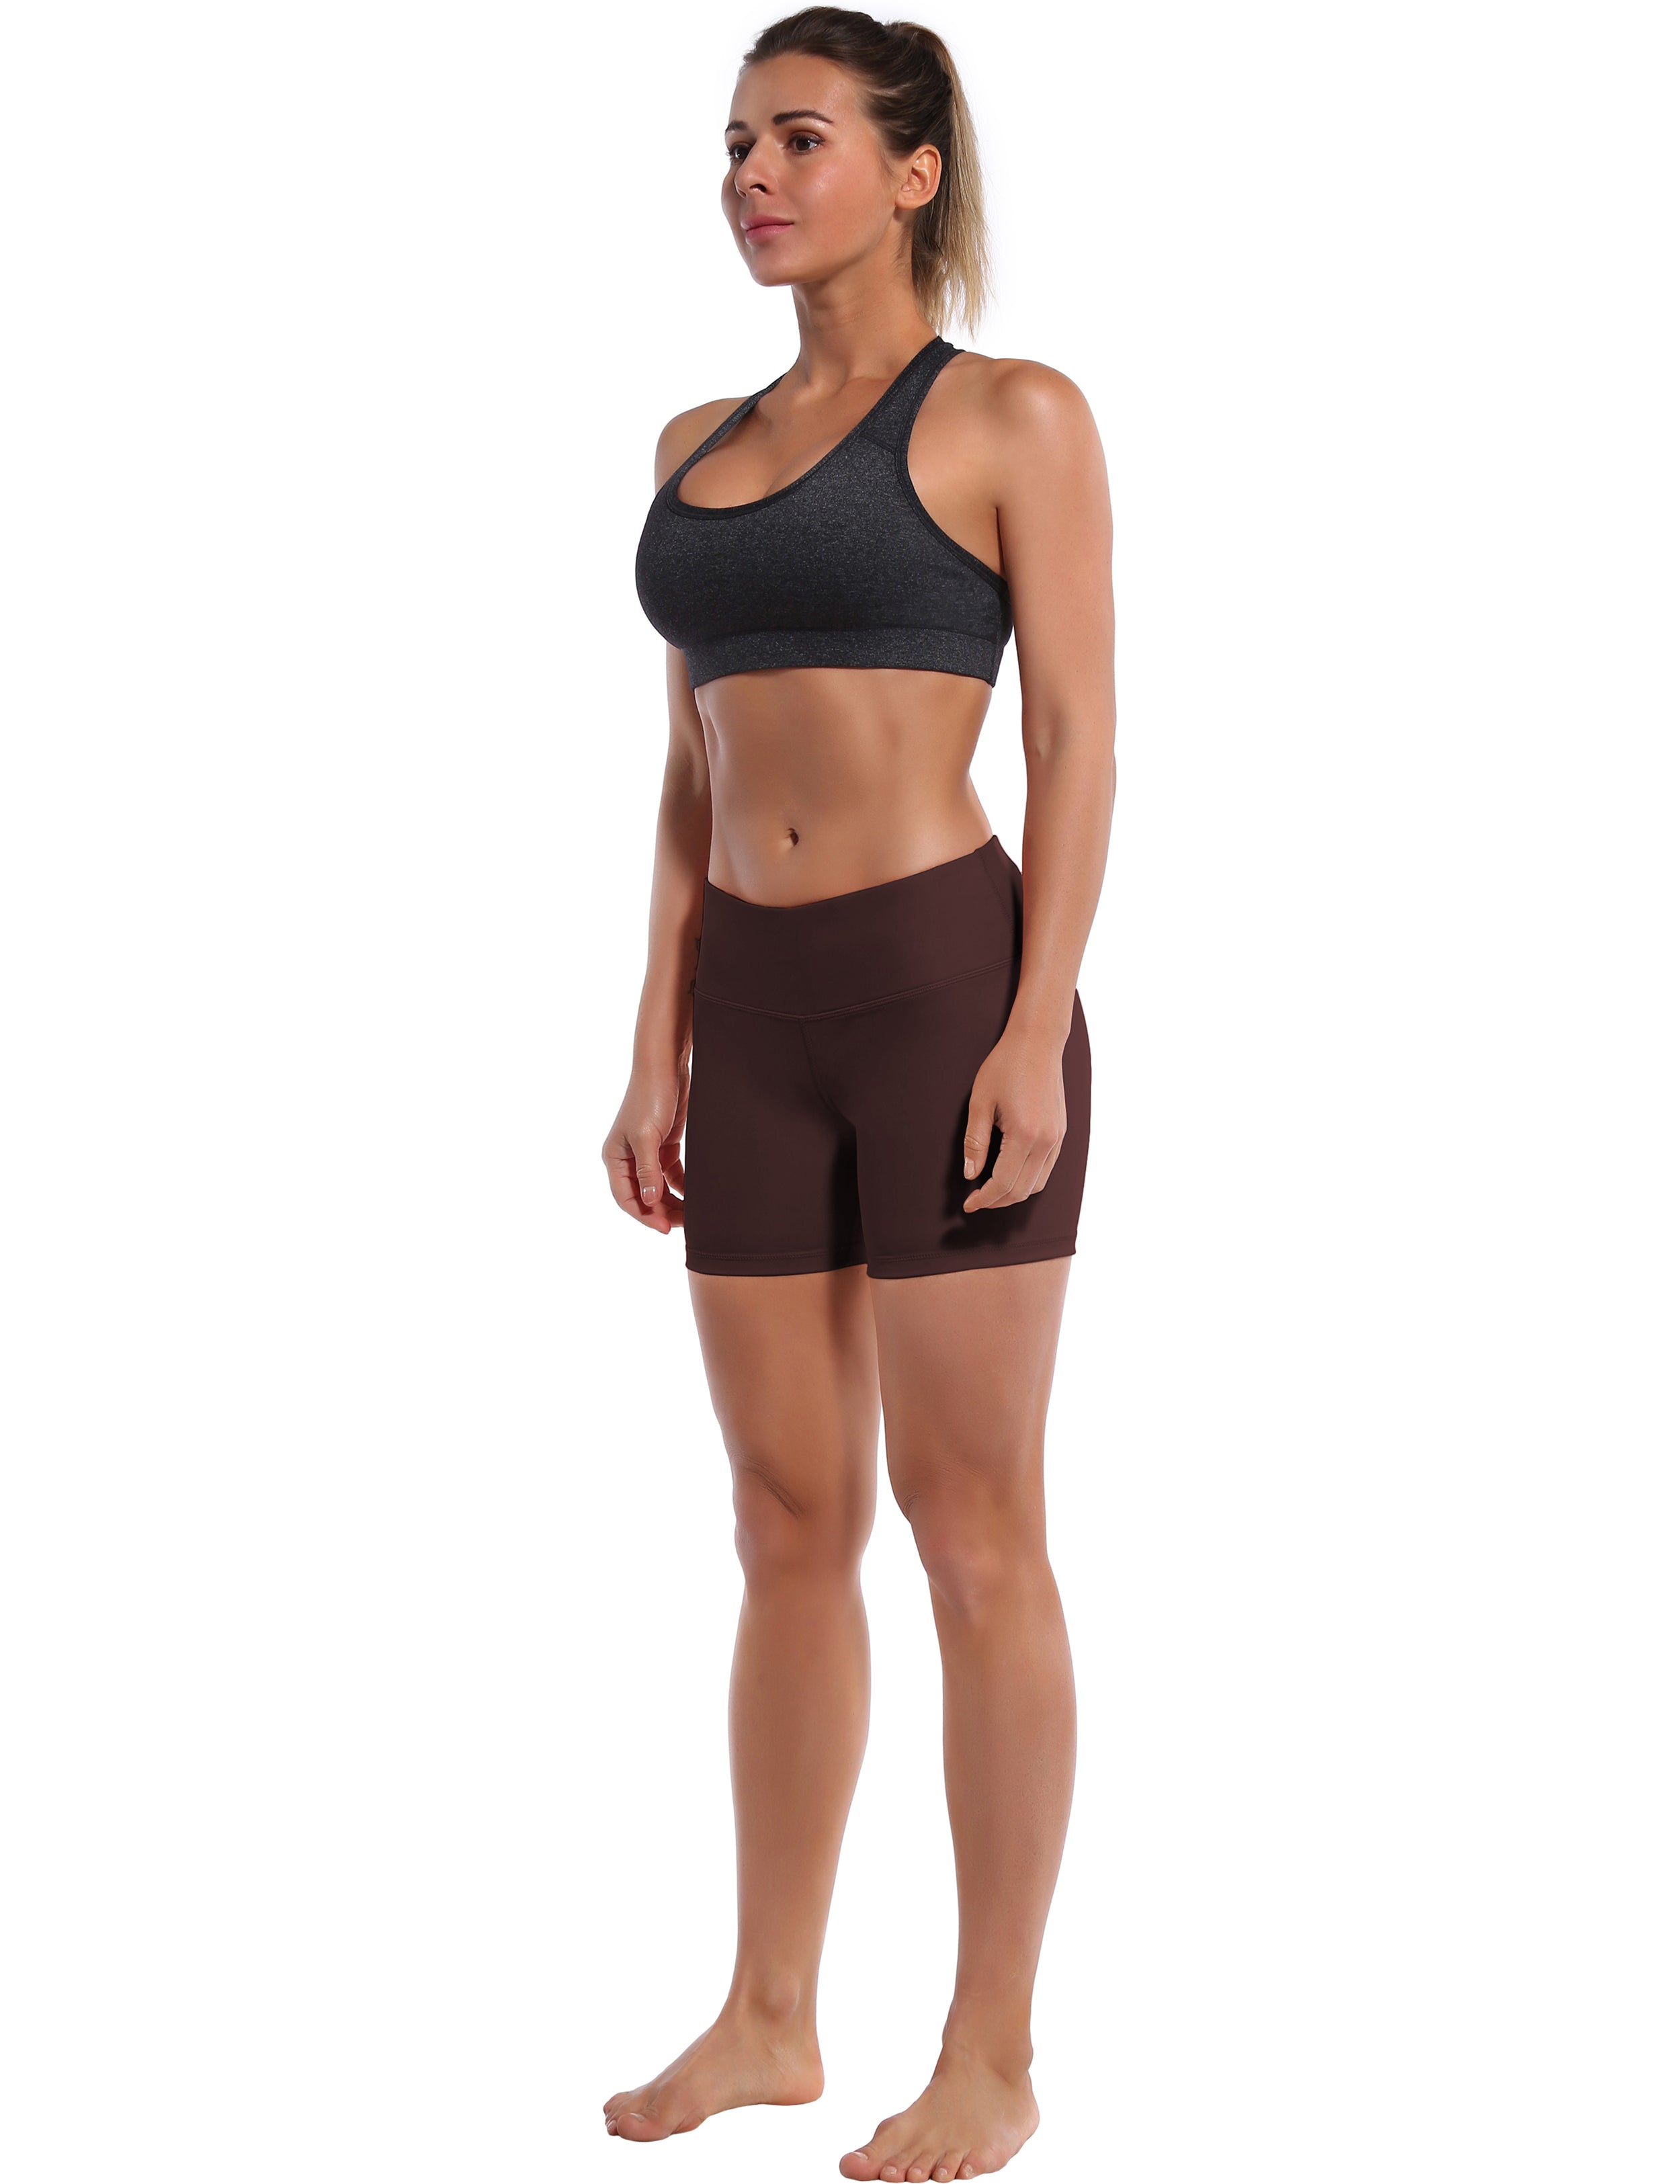 4" Jogging Shorts mahoganymaroon Sleek, soft, smooth and totally comfortable: our newest style is here. Softest-ever fabric High elasticity High density 4-way stretch Fabric doesn't attract lint easily No see-through Moisture-wicking Machine wash 75% Nylon, 25% Spandex